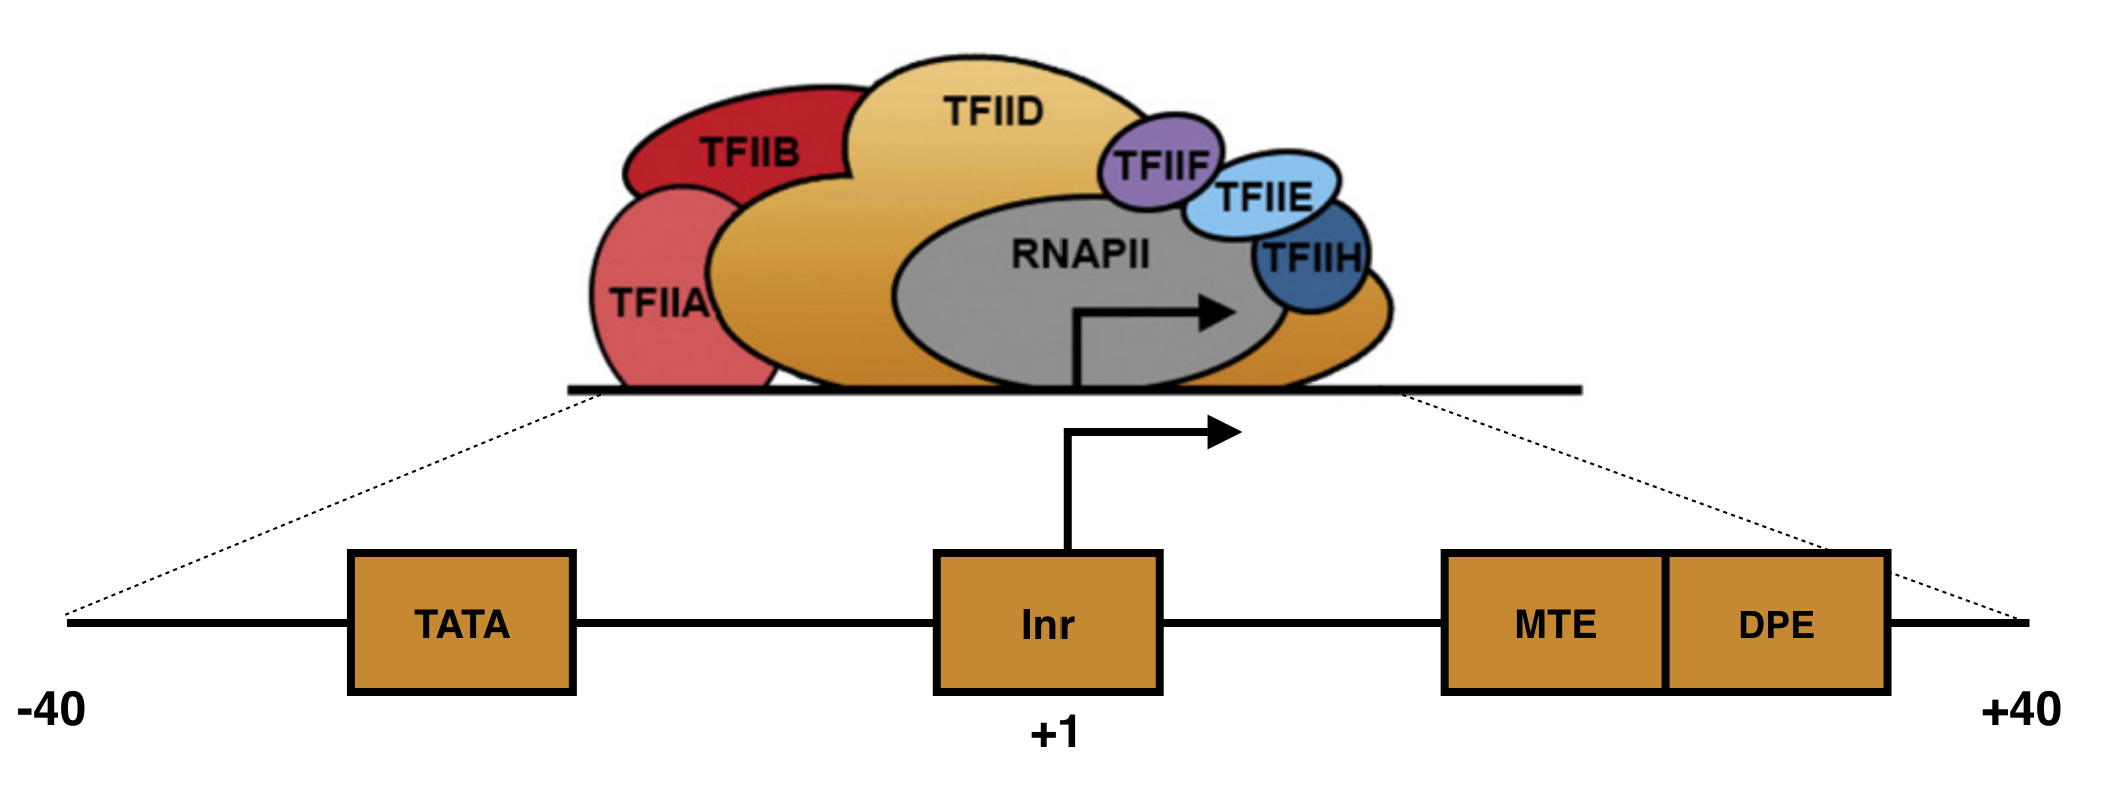 A schematic of a focused core promoter and the GTFs/RNA polymerase II that bind to it. The horizontal line is the genomic DNA. **TATA**, **Inr**, **MTE** and **DPE** are DNA sequence motifs positioned along the core promoter as shown. The **Inr** spans the TSS (+1) while the **TATA-box** is upstream and the **MTE** and **DPE** motifs are downstream.  Image from Danino et al. 2015.